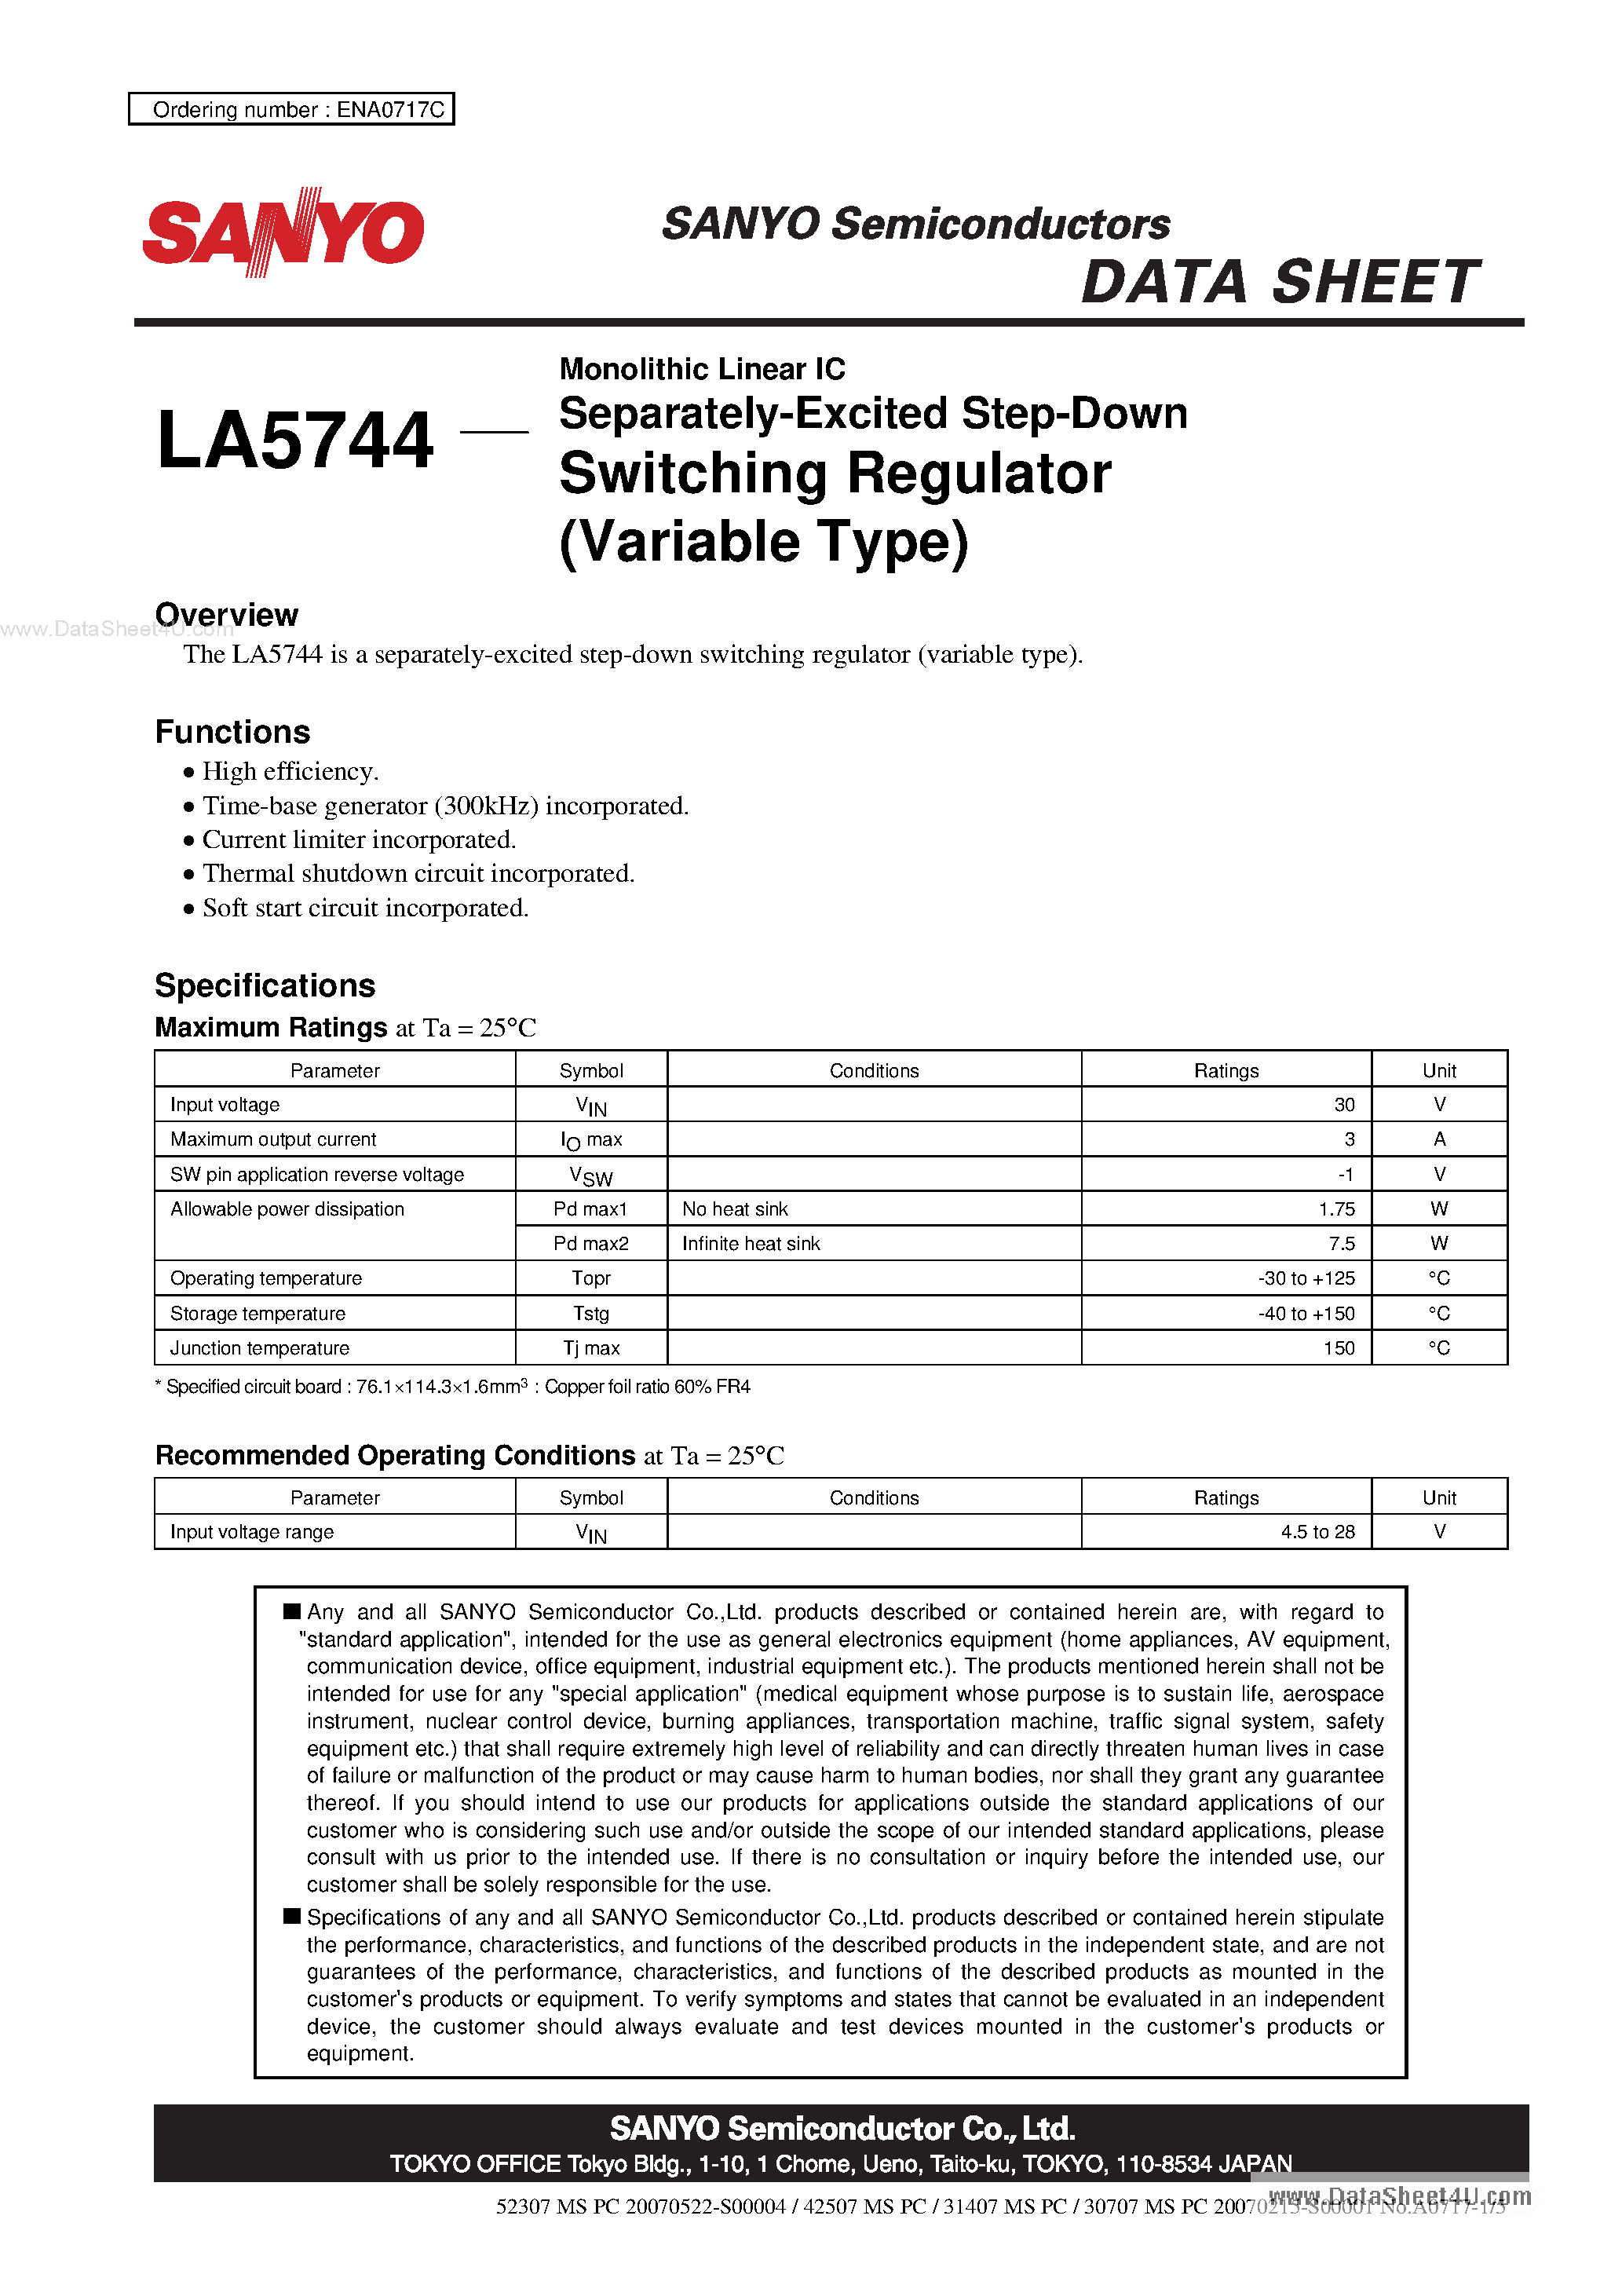 Даташит LA5744-Monolithic Linear IC Separately-Excited Step-Down Switching Regulator страница 1